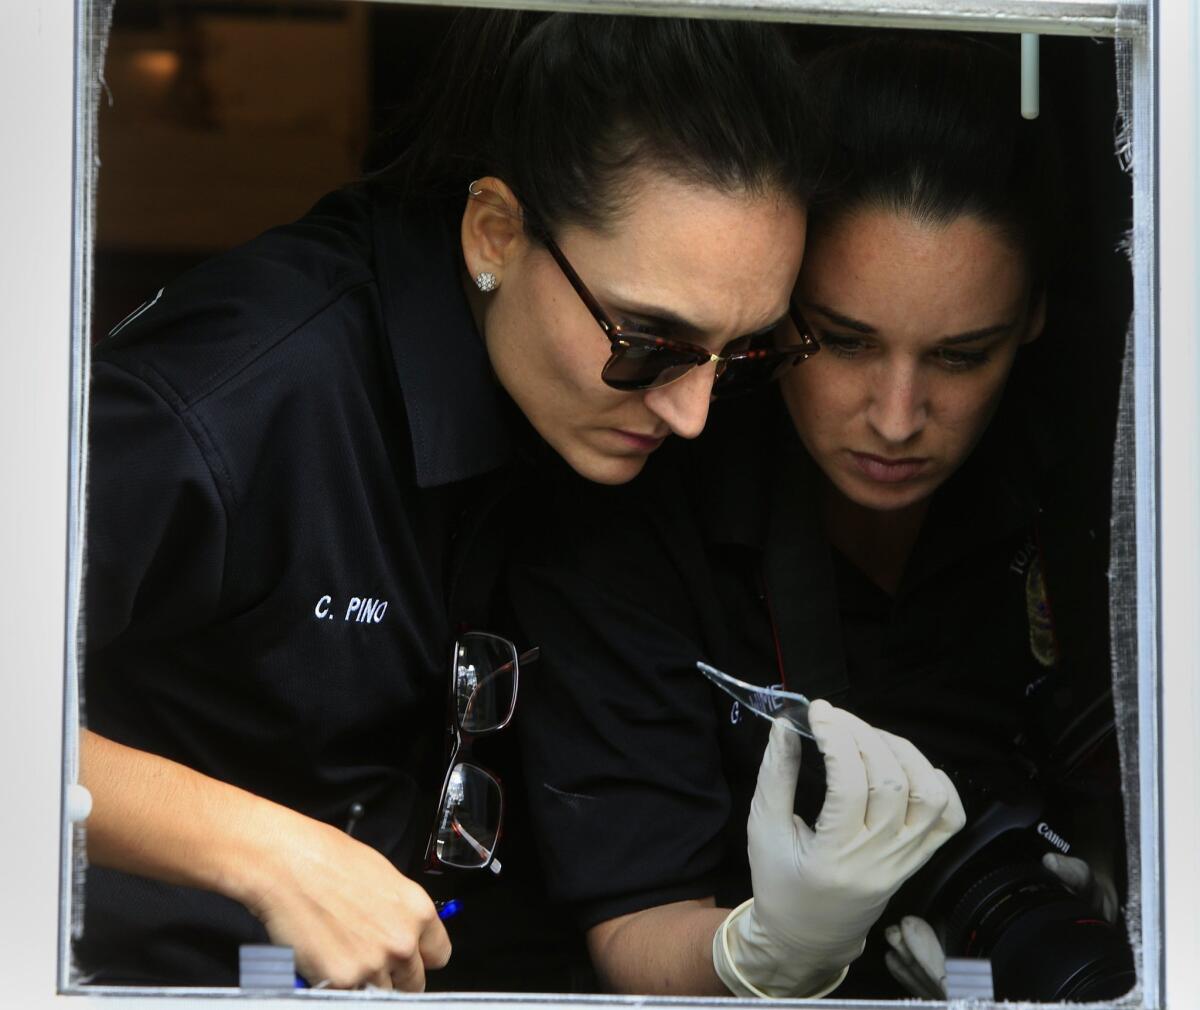 Christina Pino, left, and Gabrielle Wimer, forensic ID specialists with the Torrance Police Department, collect evidence at a burglary.